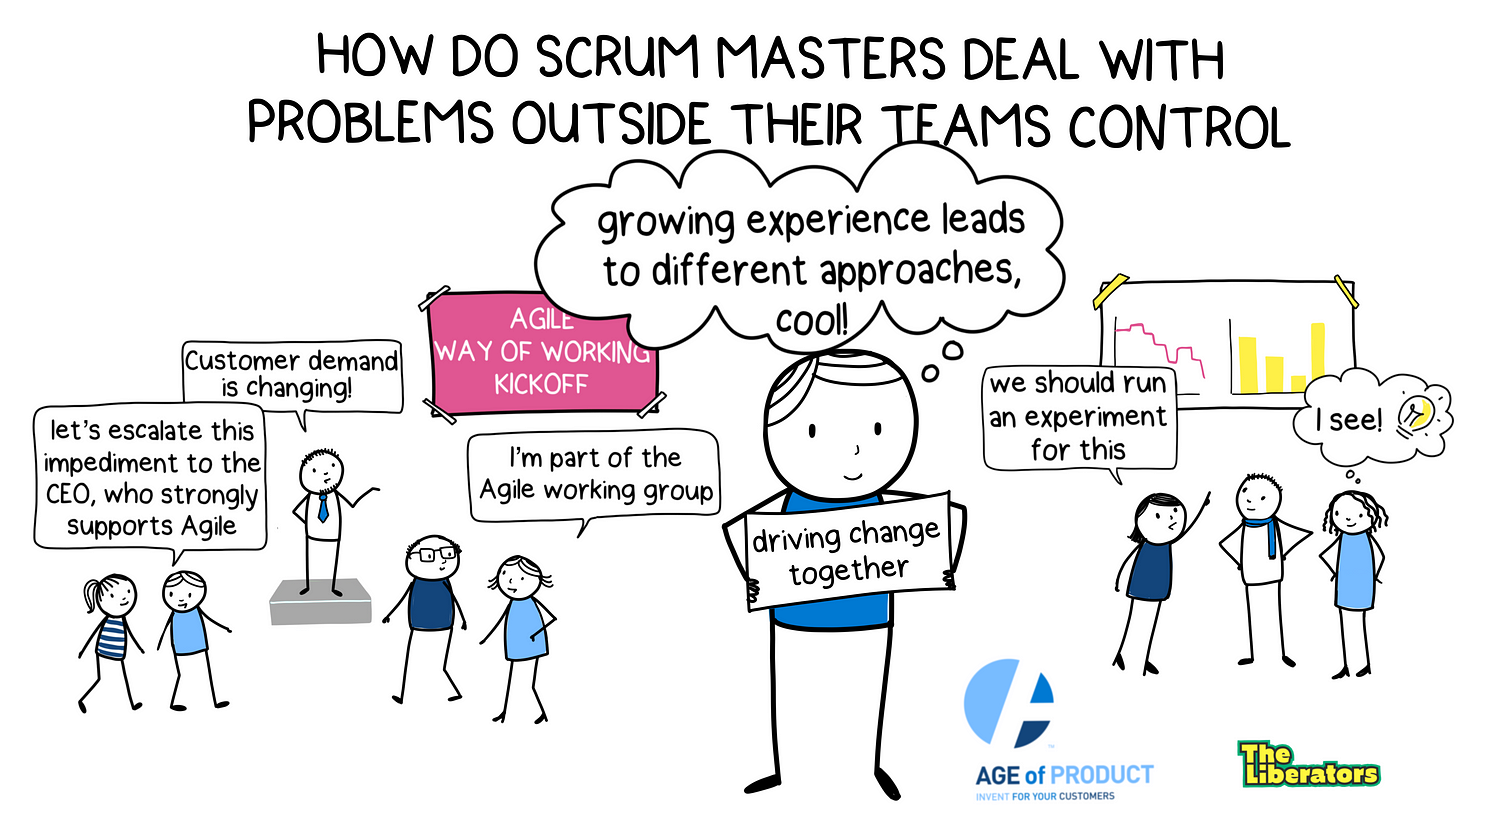 Deal with problems. Scrum Master. Scrum приколы. Шутки про Скрам. Скрам мастер Мем.